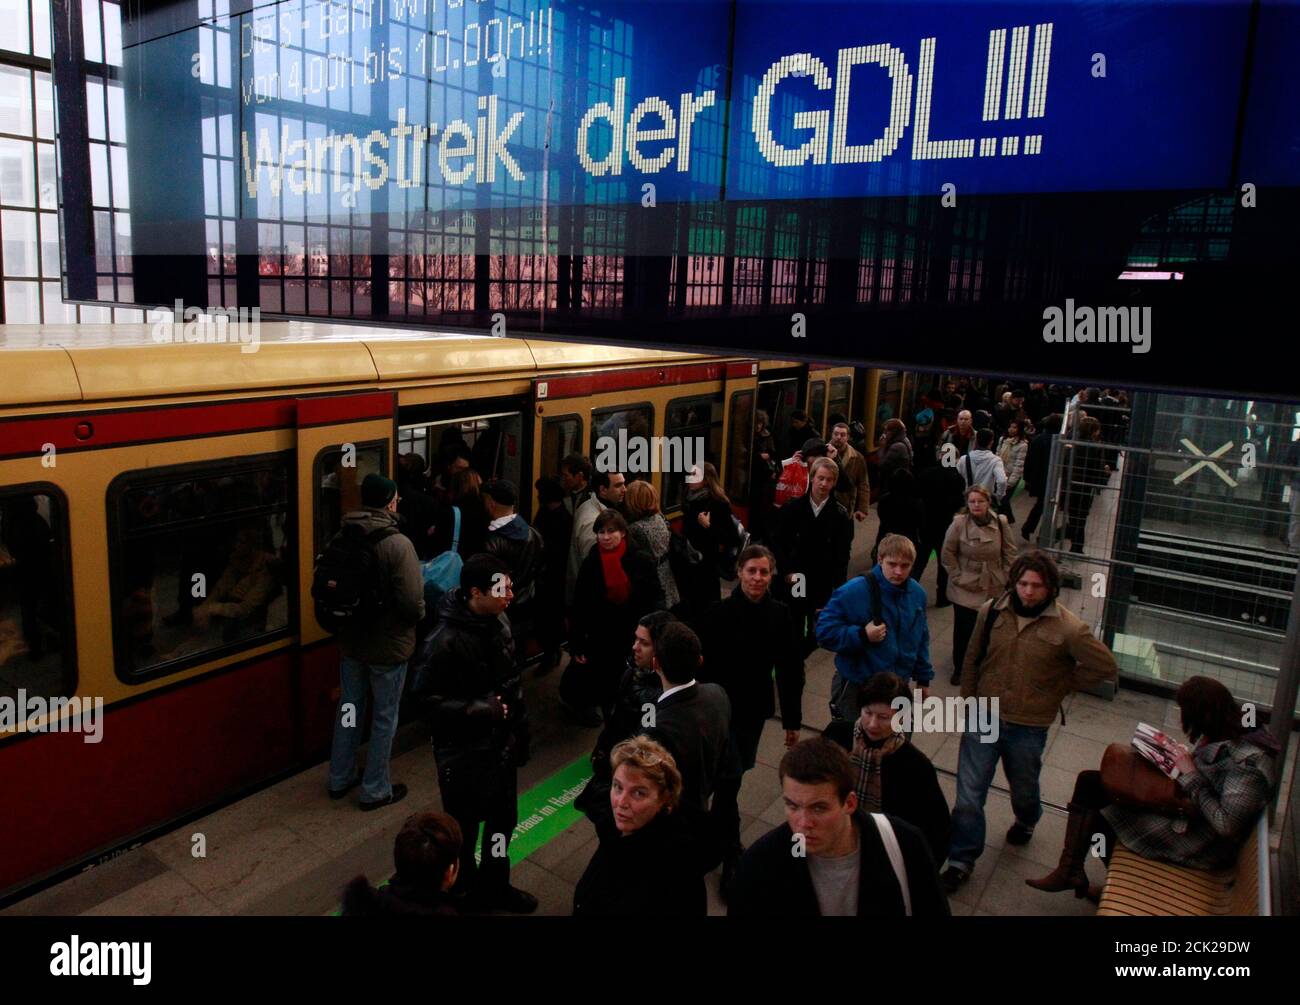 People enter and leave a S-Bahn commuter train in Berlin's Friedrichstrasse station during a train driver strike, March 10, 2011. German train drivers will launch strikes to disrupt freight transport across the country starting on Wednesday evening, and extend the action to passenger travel early on Thursday, their union said.   REUTERS/Thomas Peter  (GERMANY - Tags: EMPLOYMENT BUSINESS TRANSPORT IMAGES OF THE DAY) Stock Photo